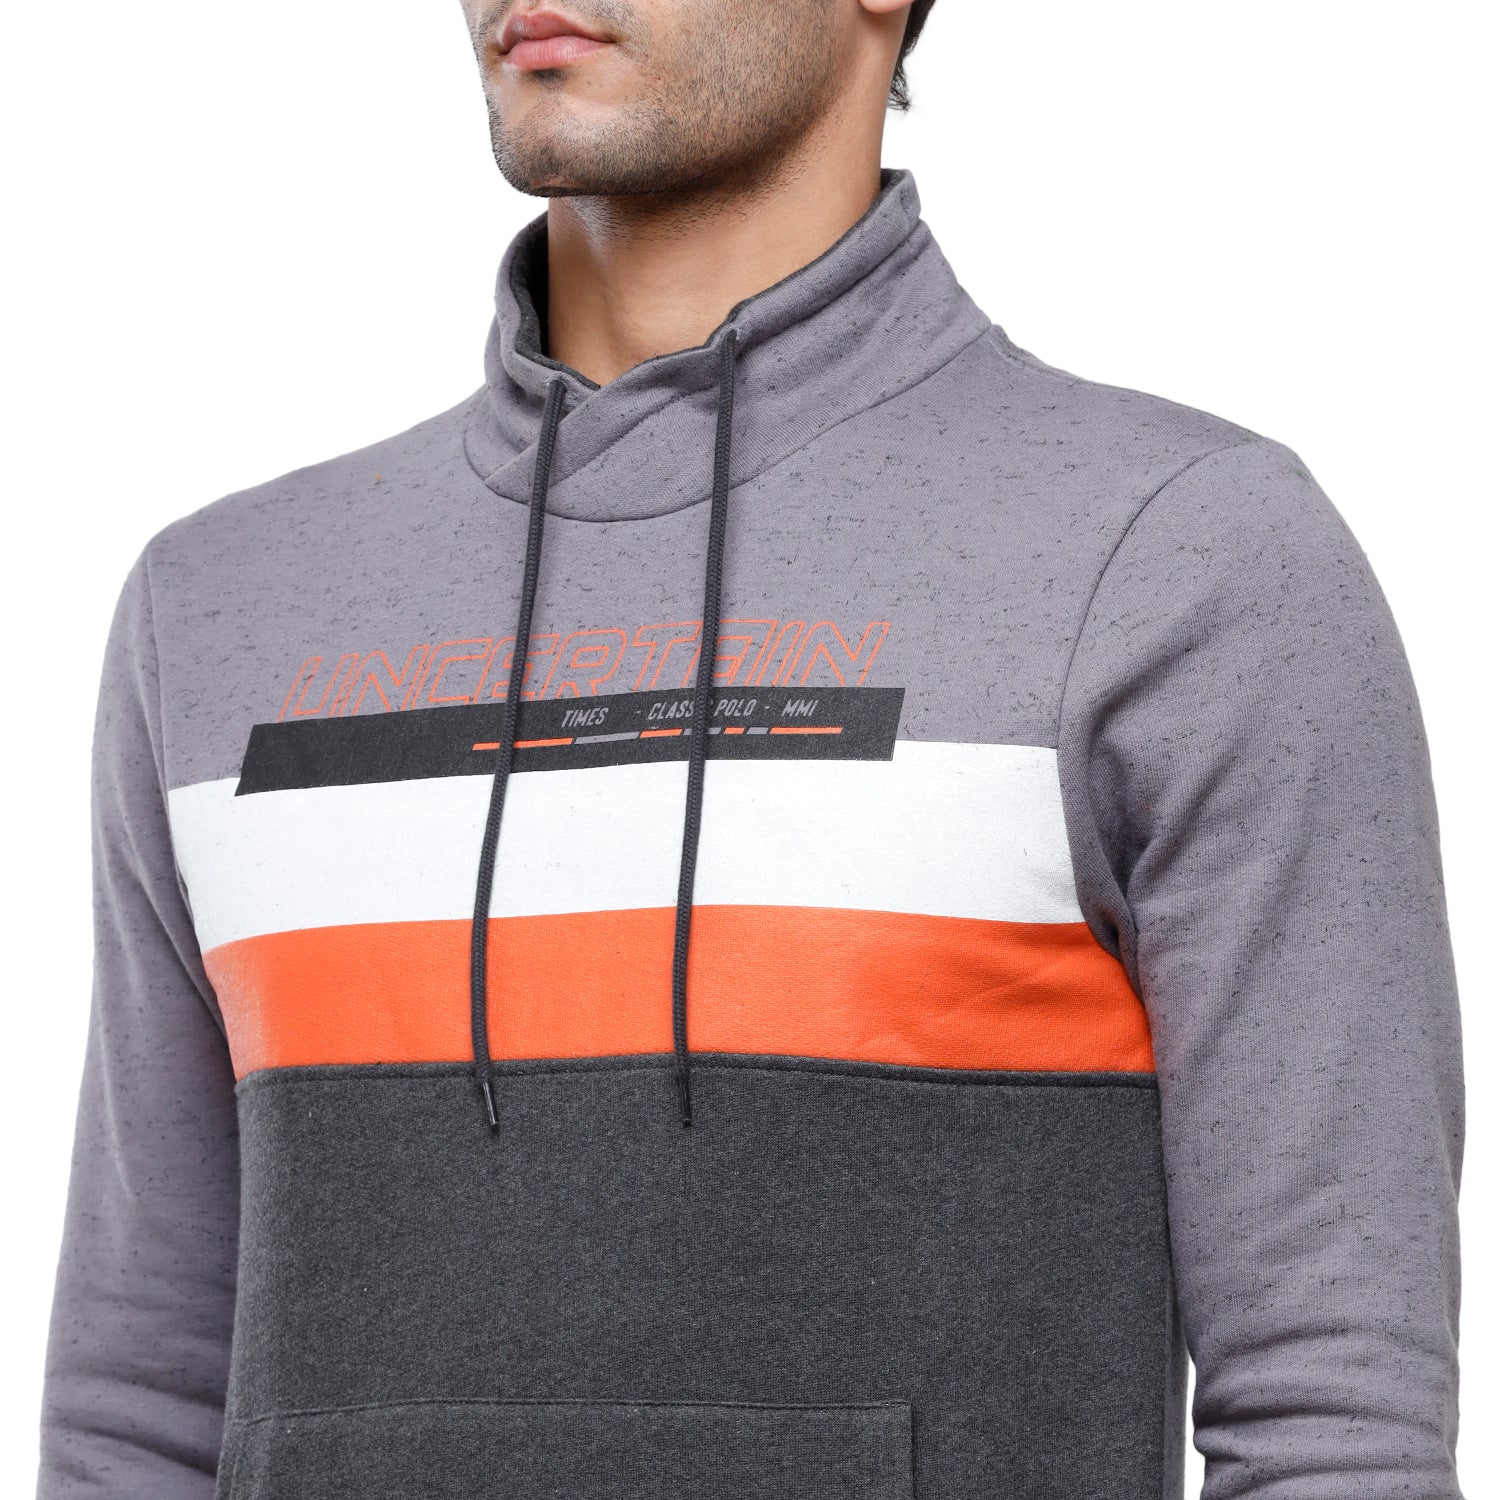 Classic Polo Men's Color Block Full Sleeve Grey H Neck Sweat Shirt - CPSS-324 B Sweat Shirts Classic Polo 